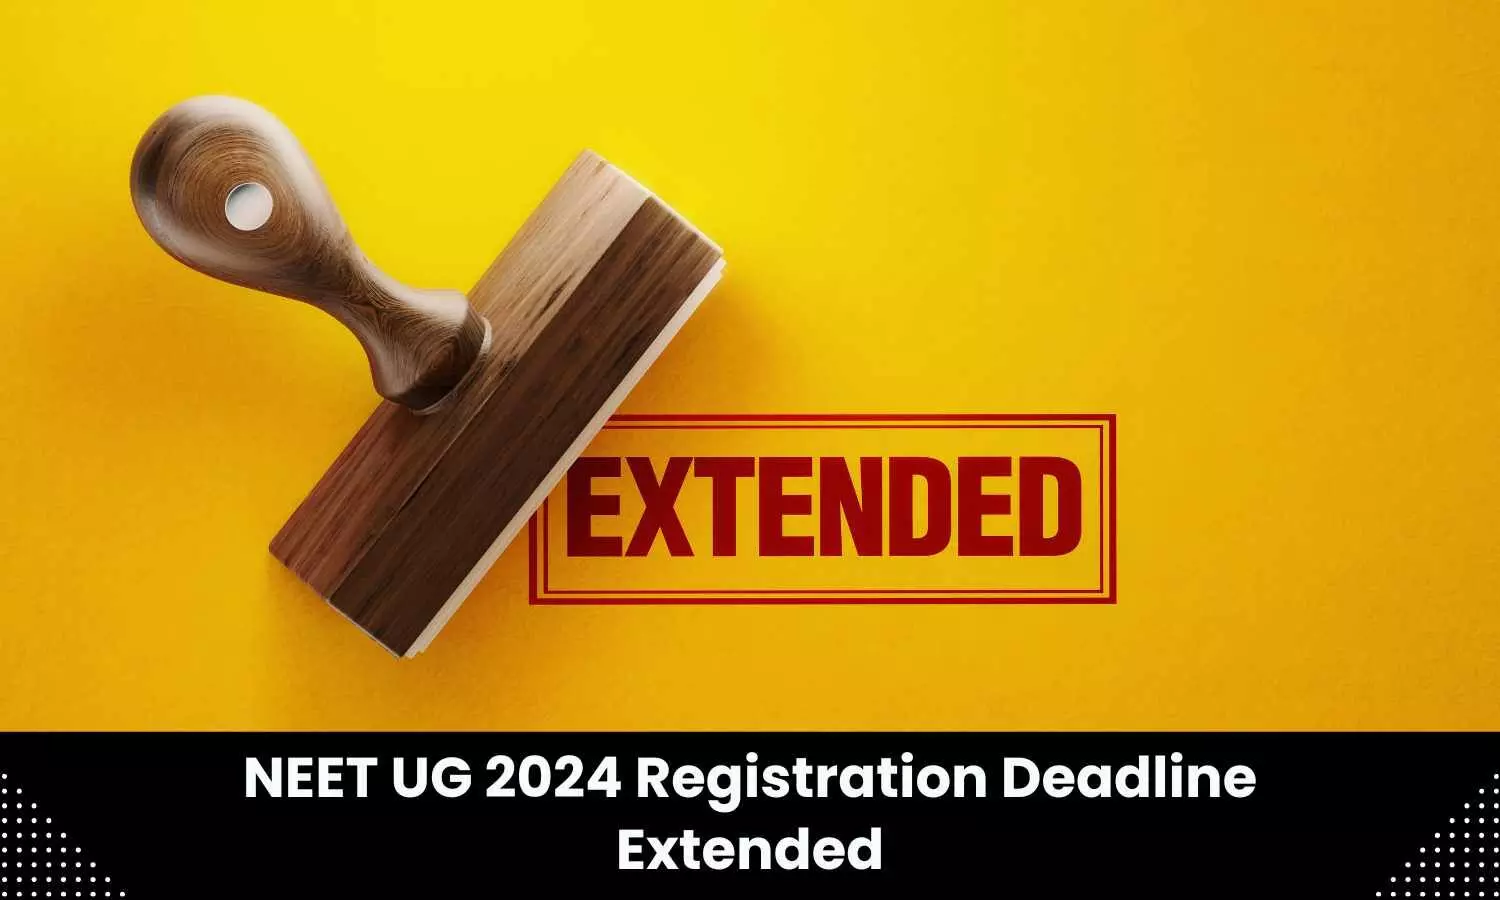 Deadline for NEET 2024 application submissions extended